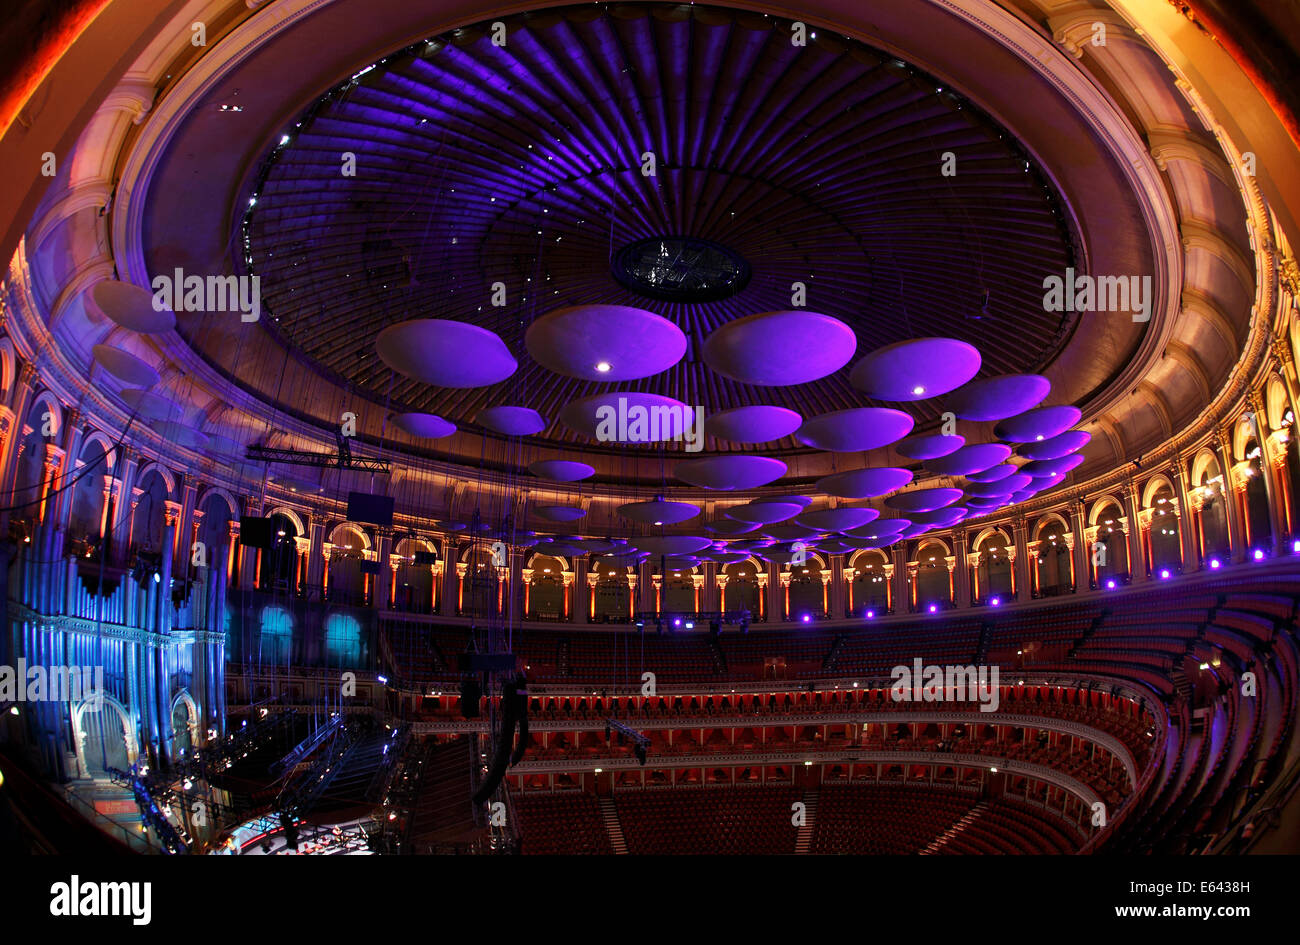 Acoustic Sound Panels In The Roof Of The Royal Albert Hall London